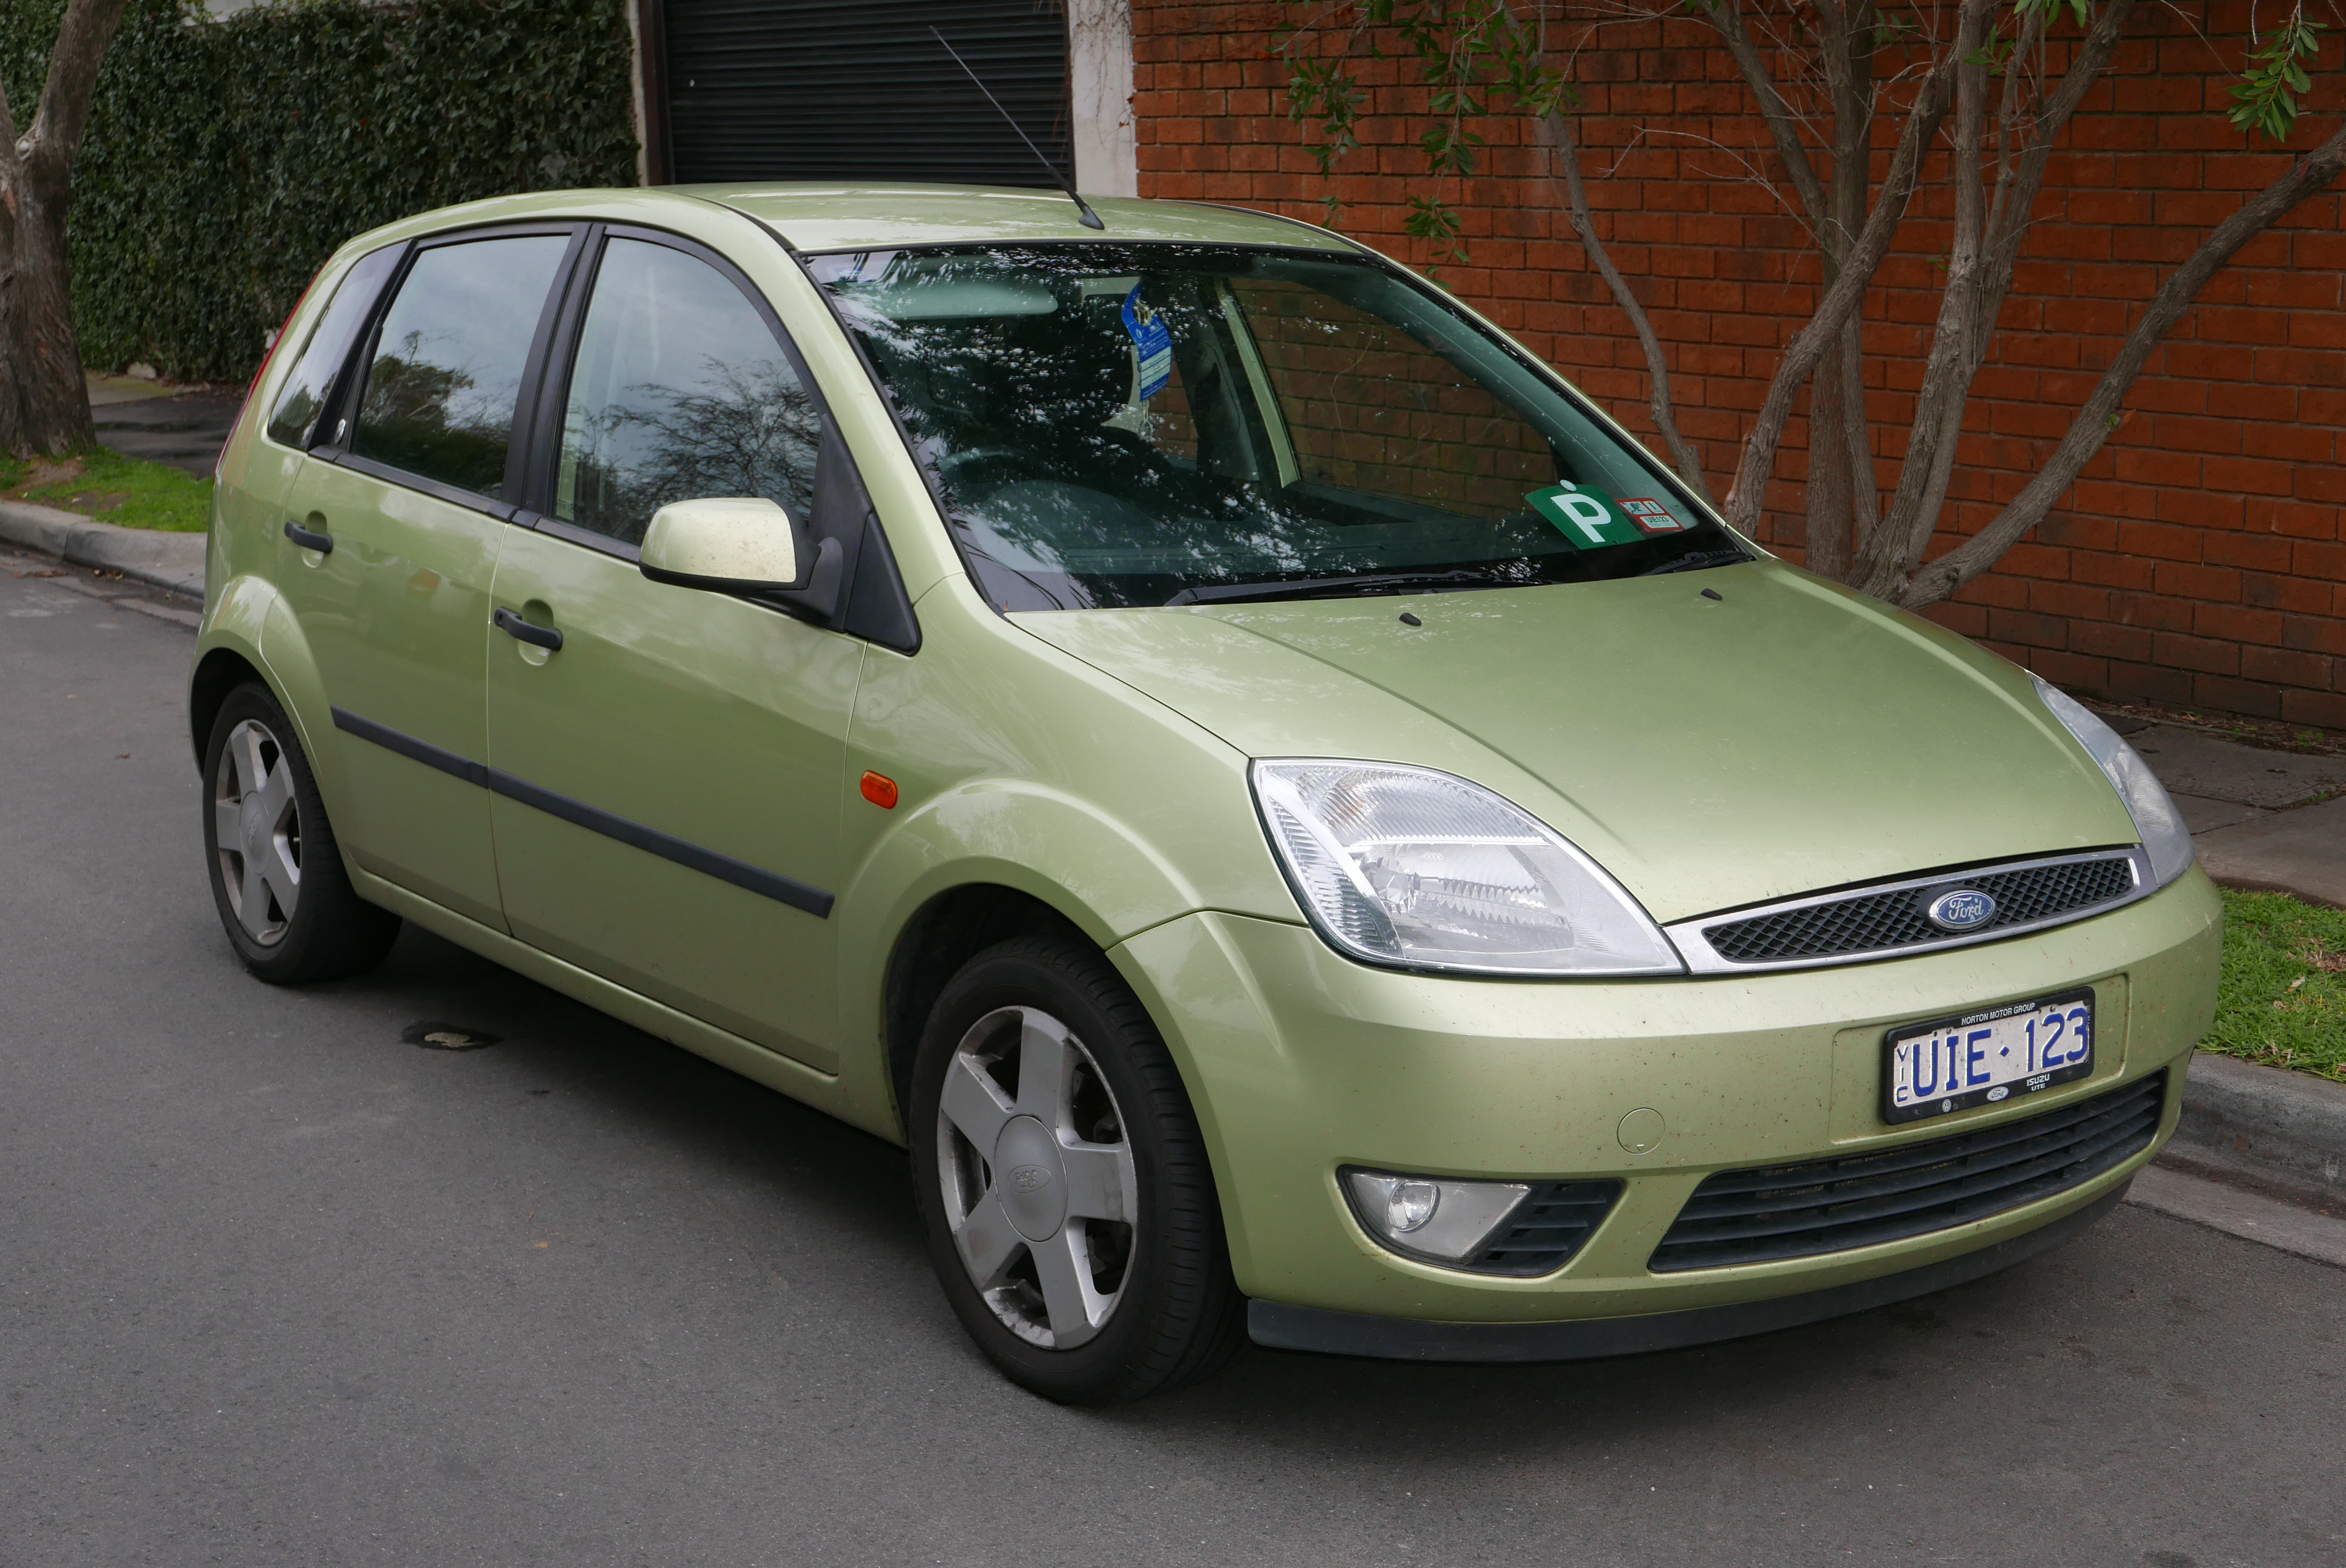 Ford Fiesta Review, For Sale, Interior, Models & News in Australia